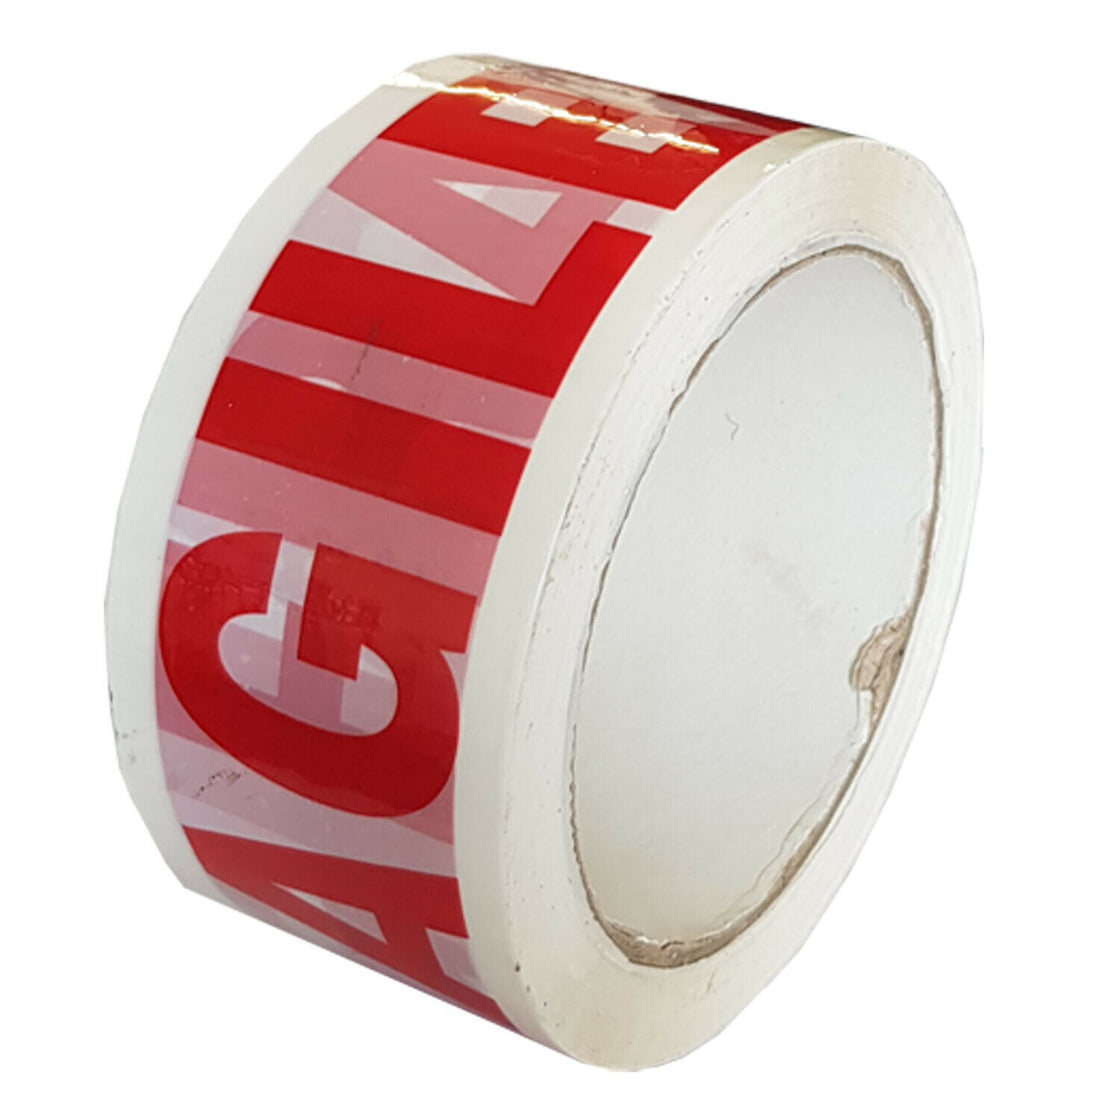 PACK OF 6 RED & WHITE FRAGILE PRINT PACKING TAPE - PGS Supplies 21 Ltd